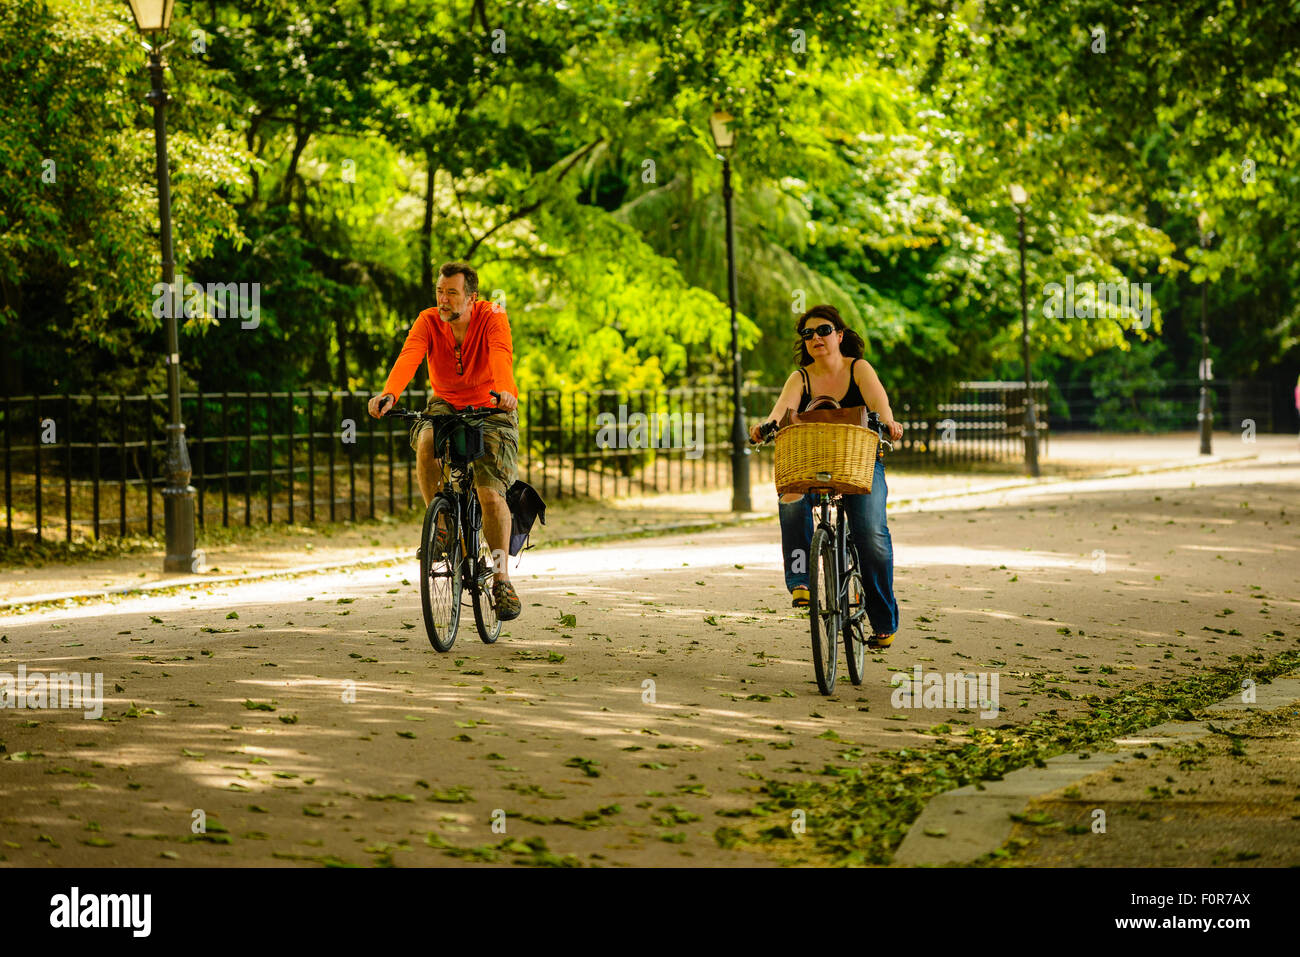 Cyclists in Battersea Park London England Stock Photo